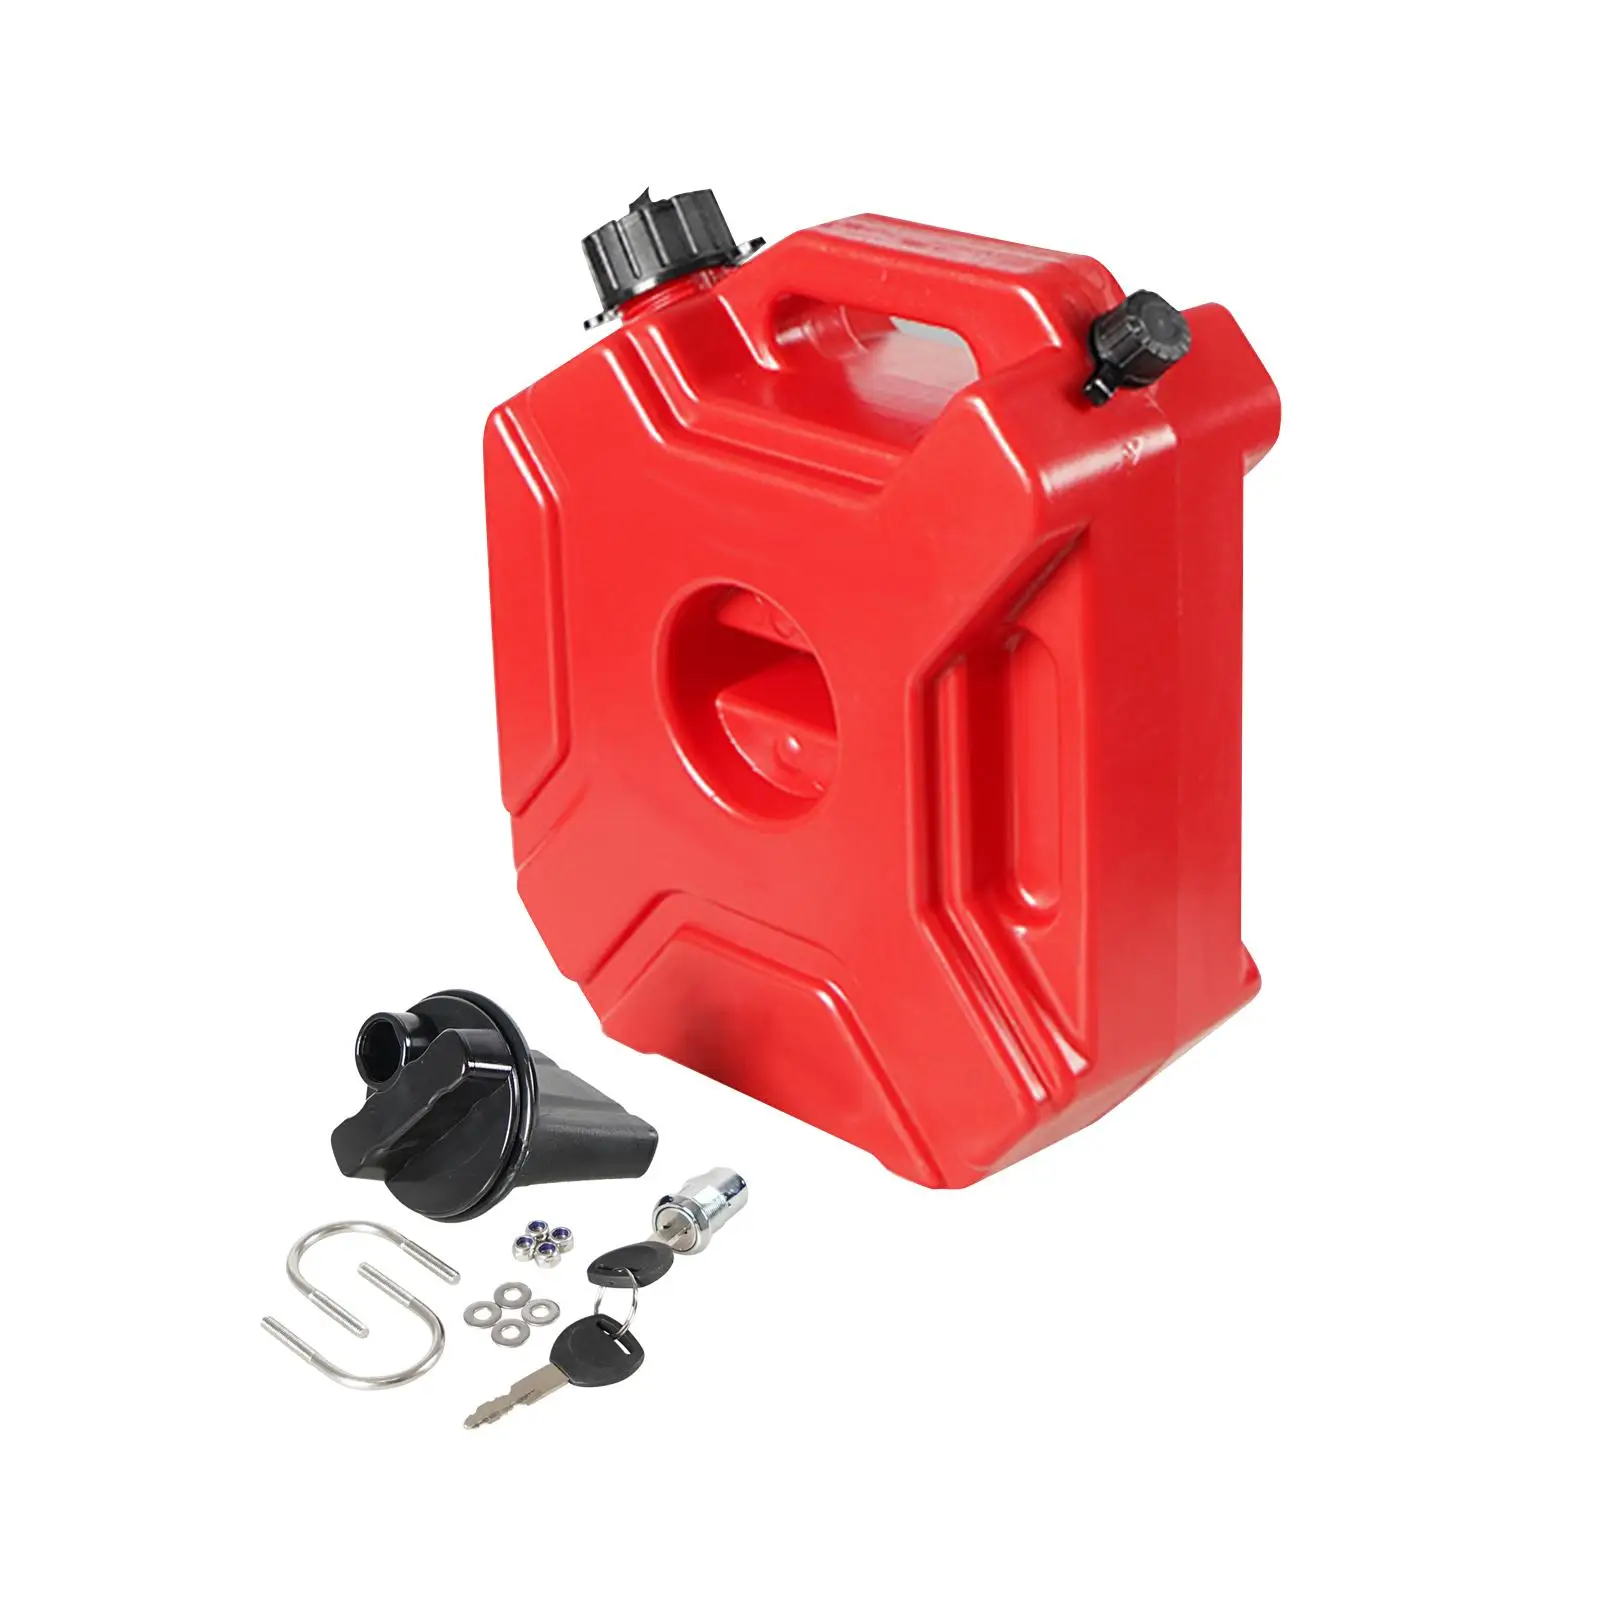 Petrol Tanks 5L Easily Install Universal Fuel Tank Spare Container for Car Travel SUV Automotive Motorcycle Water Resistant